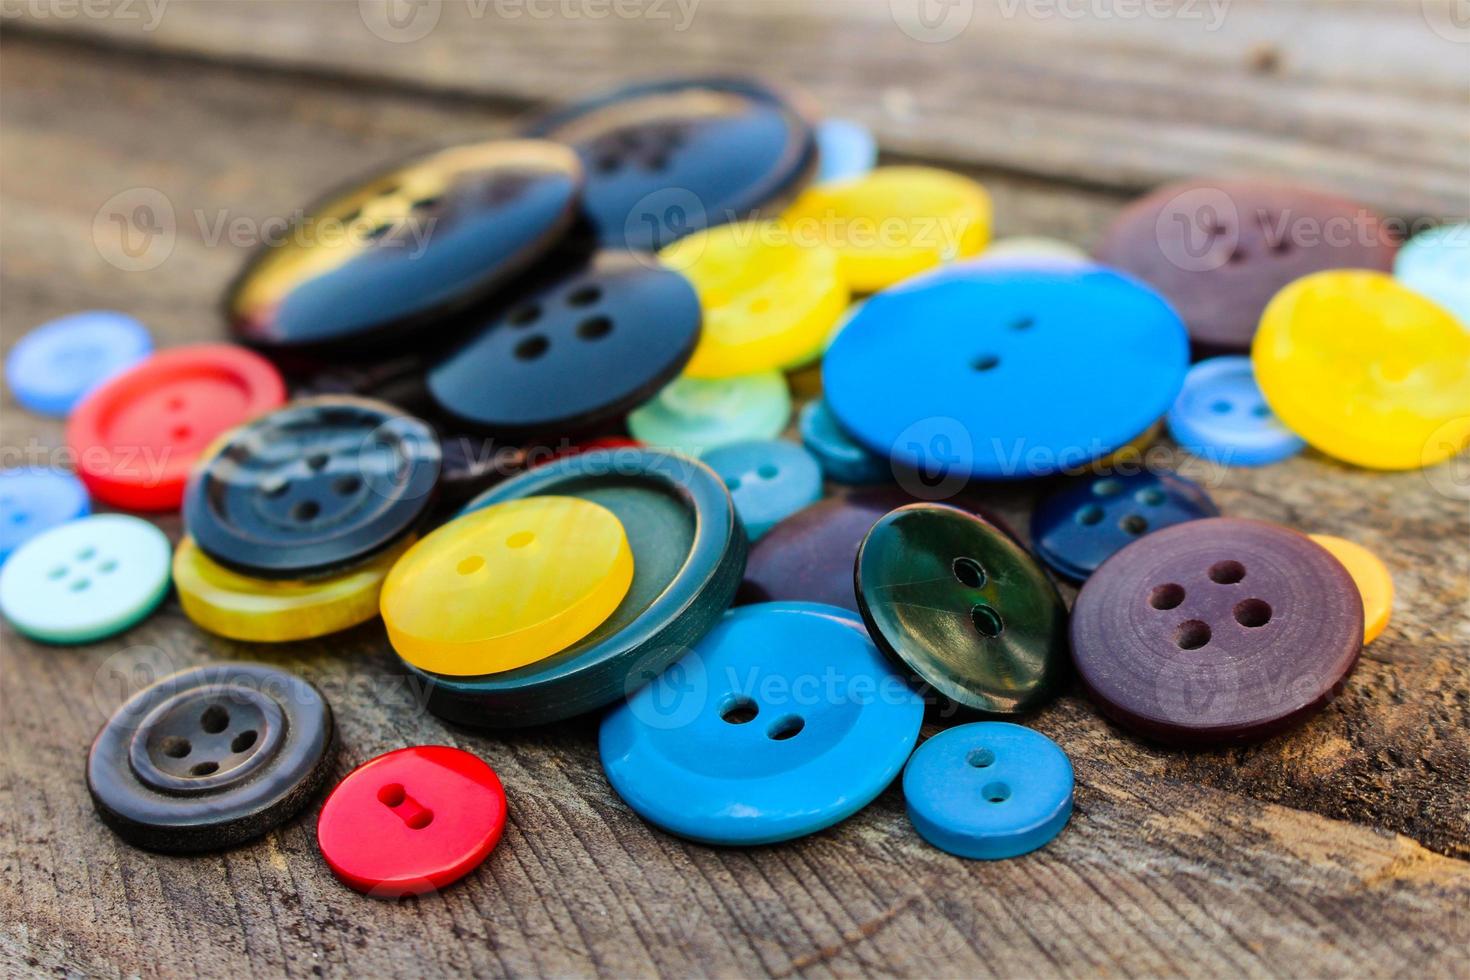 Lots of colorful buttons for clothes on wooden background. photo